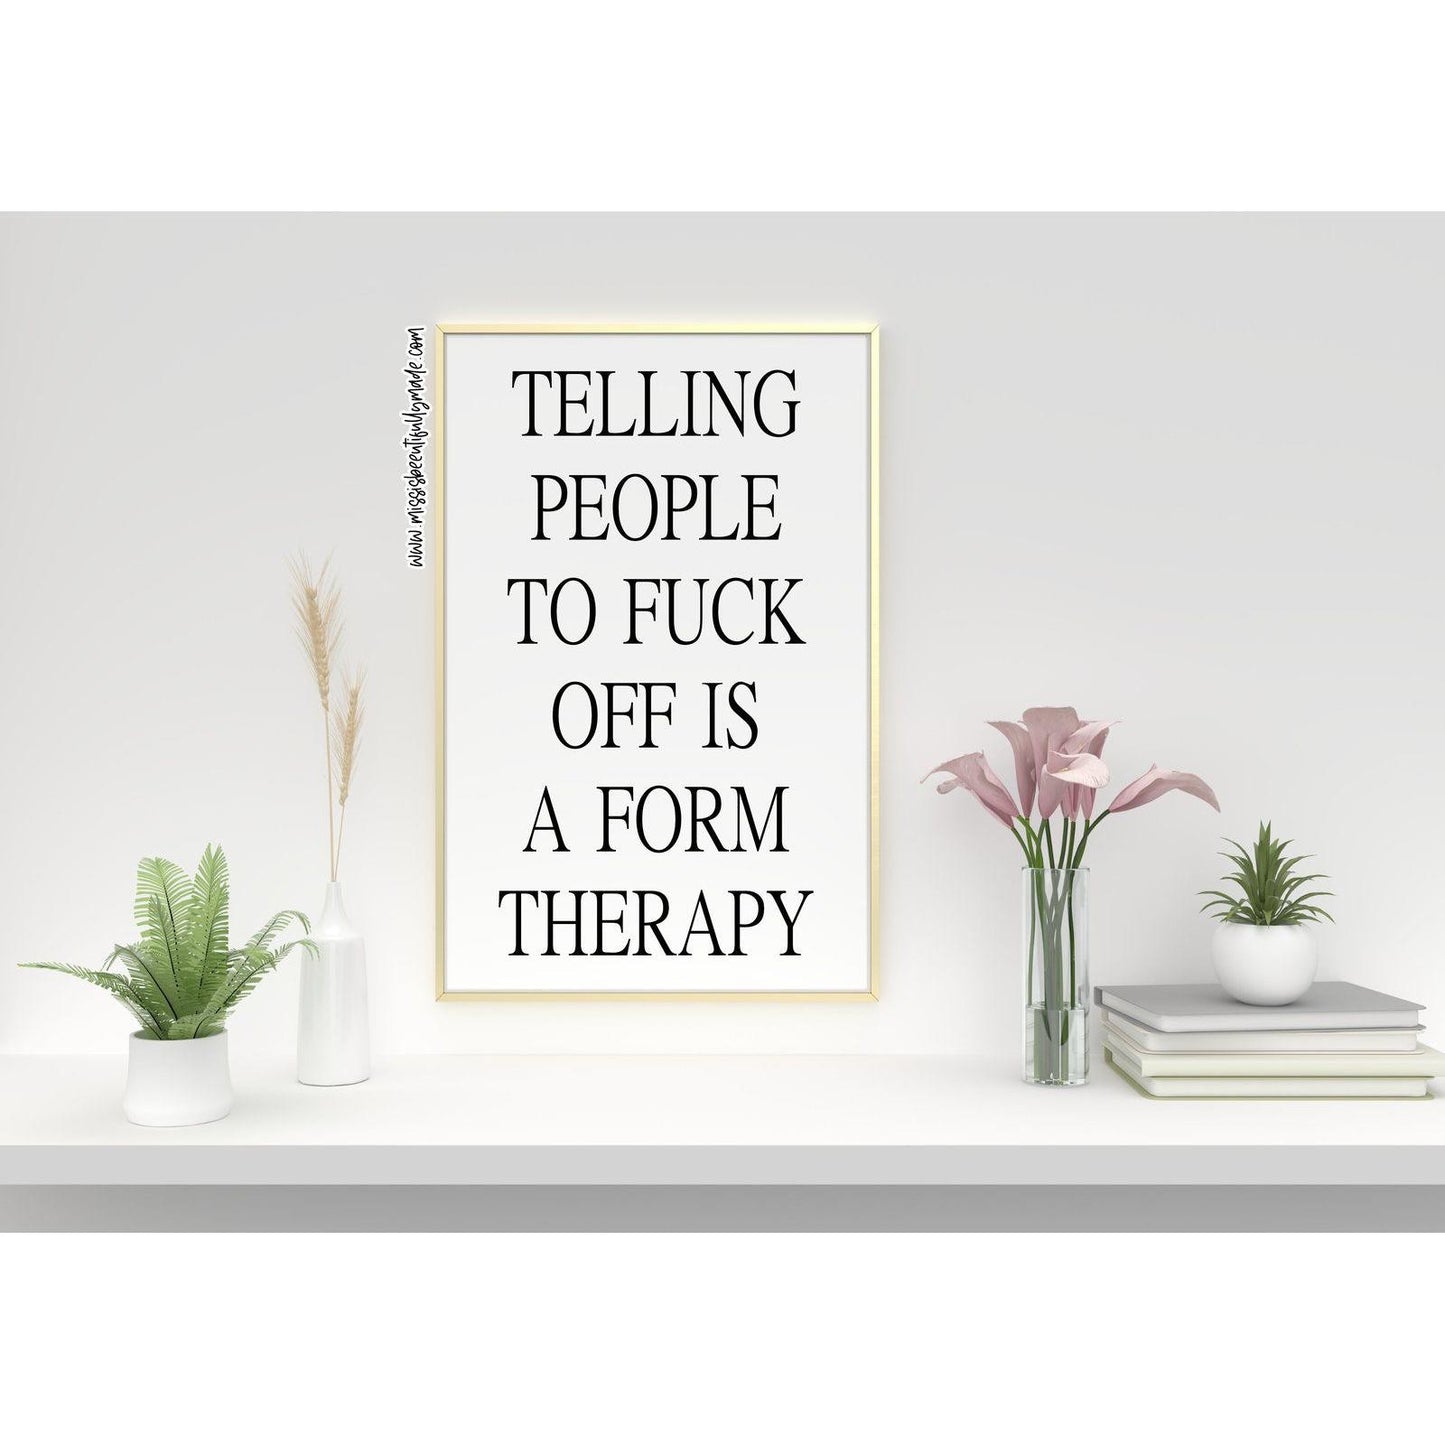 Digital Print - Telling people to fuck off is a form of therapy